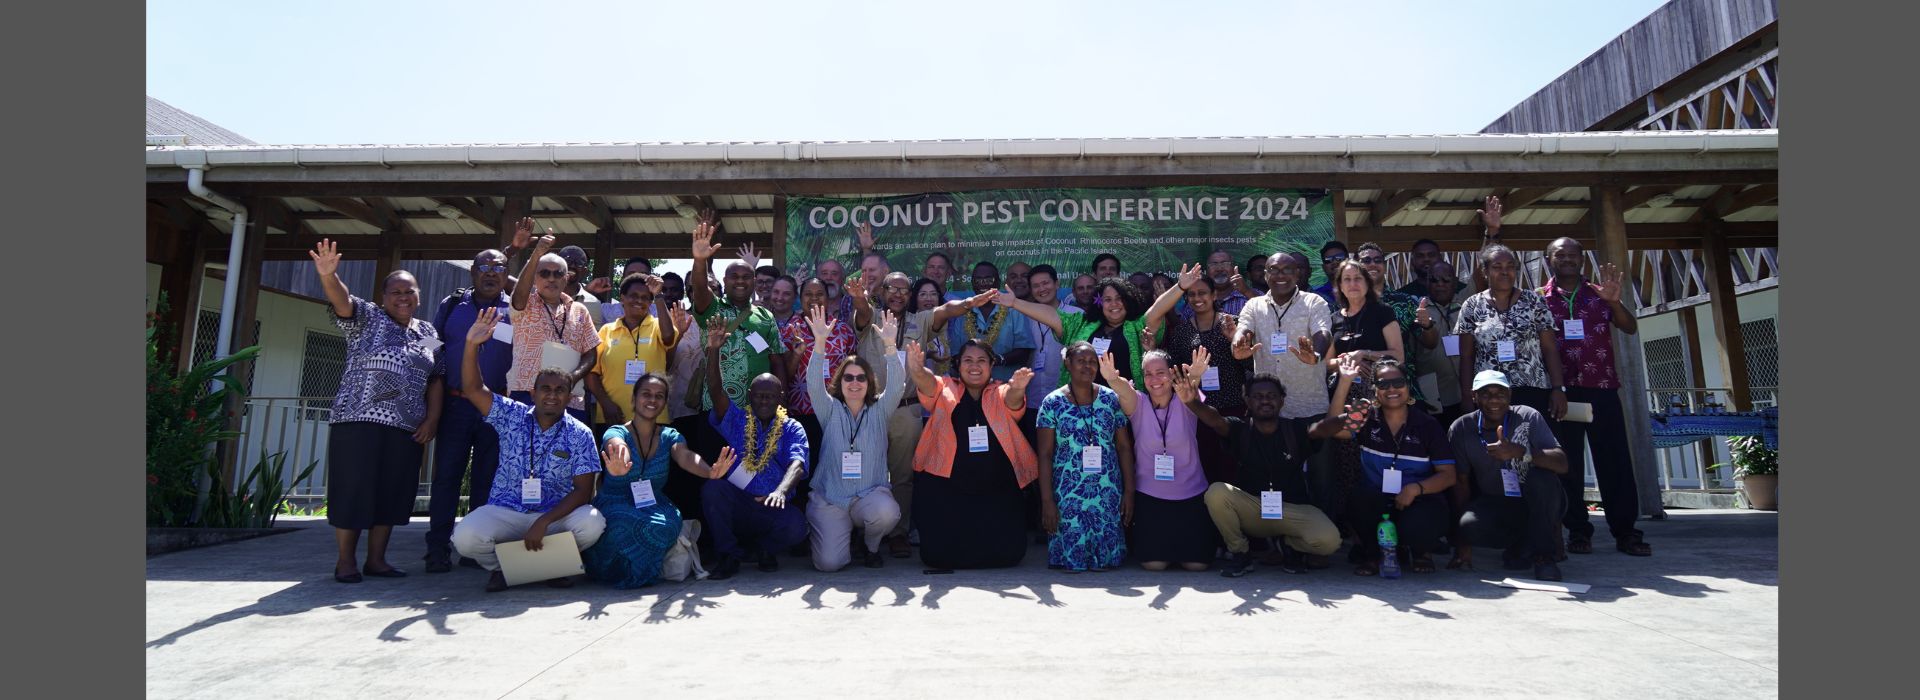 news-article-pacific-islands-coconut-pest-management-conference-highlights-collaborative-efforts-and-action-plan20240709111832.jpg